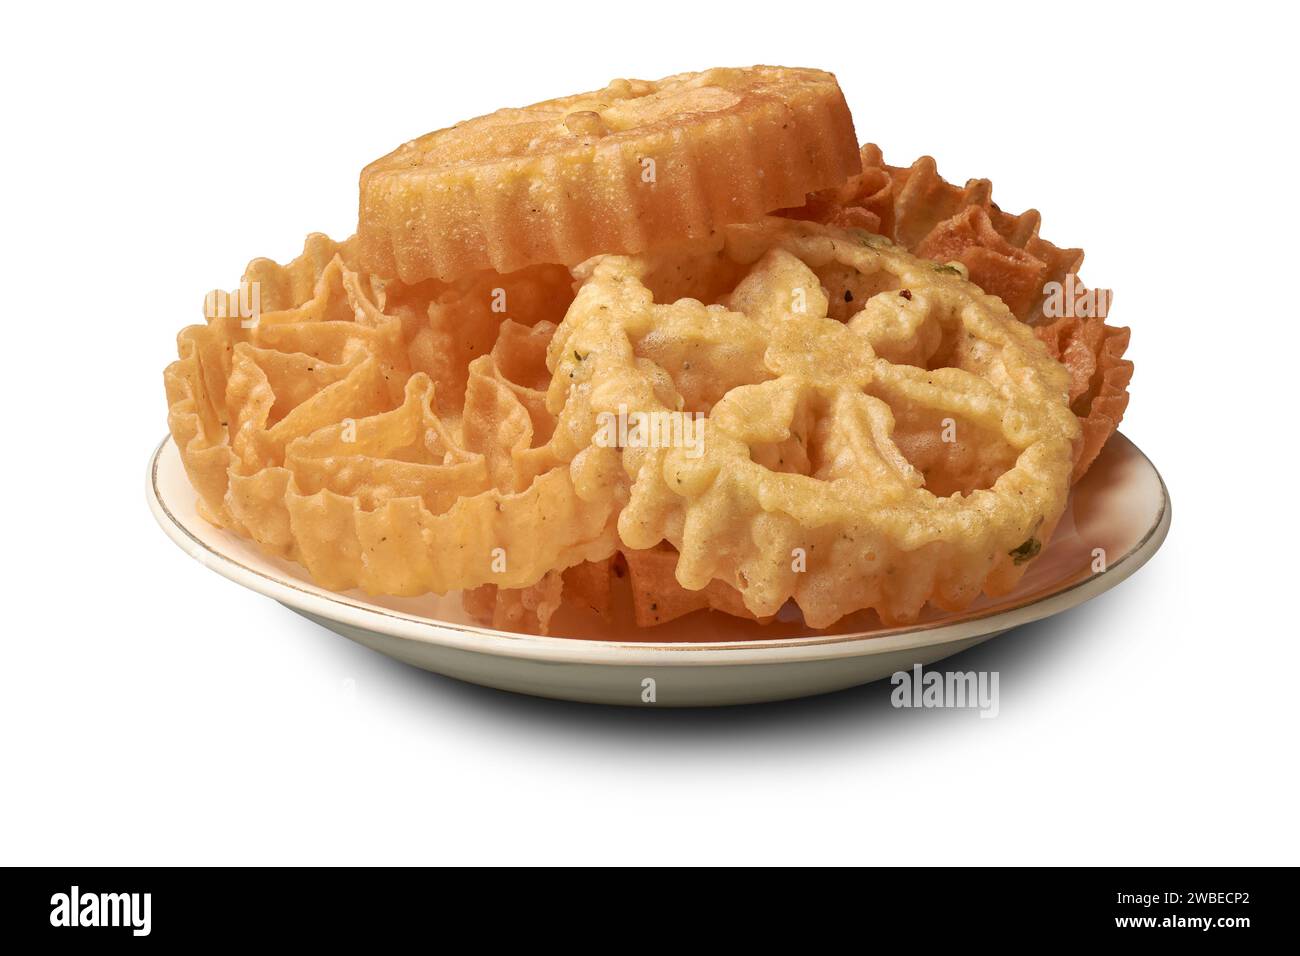 kokis, plate of crispy and deep fried sri lankan food, traditional and popular dessert made from batter of rice flour and coconut milk, festive season Stock Photo